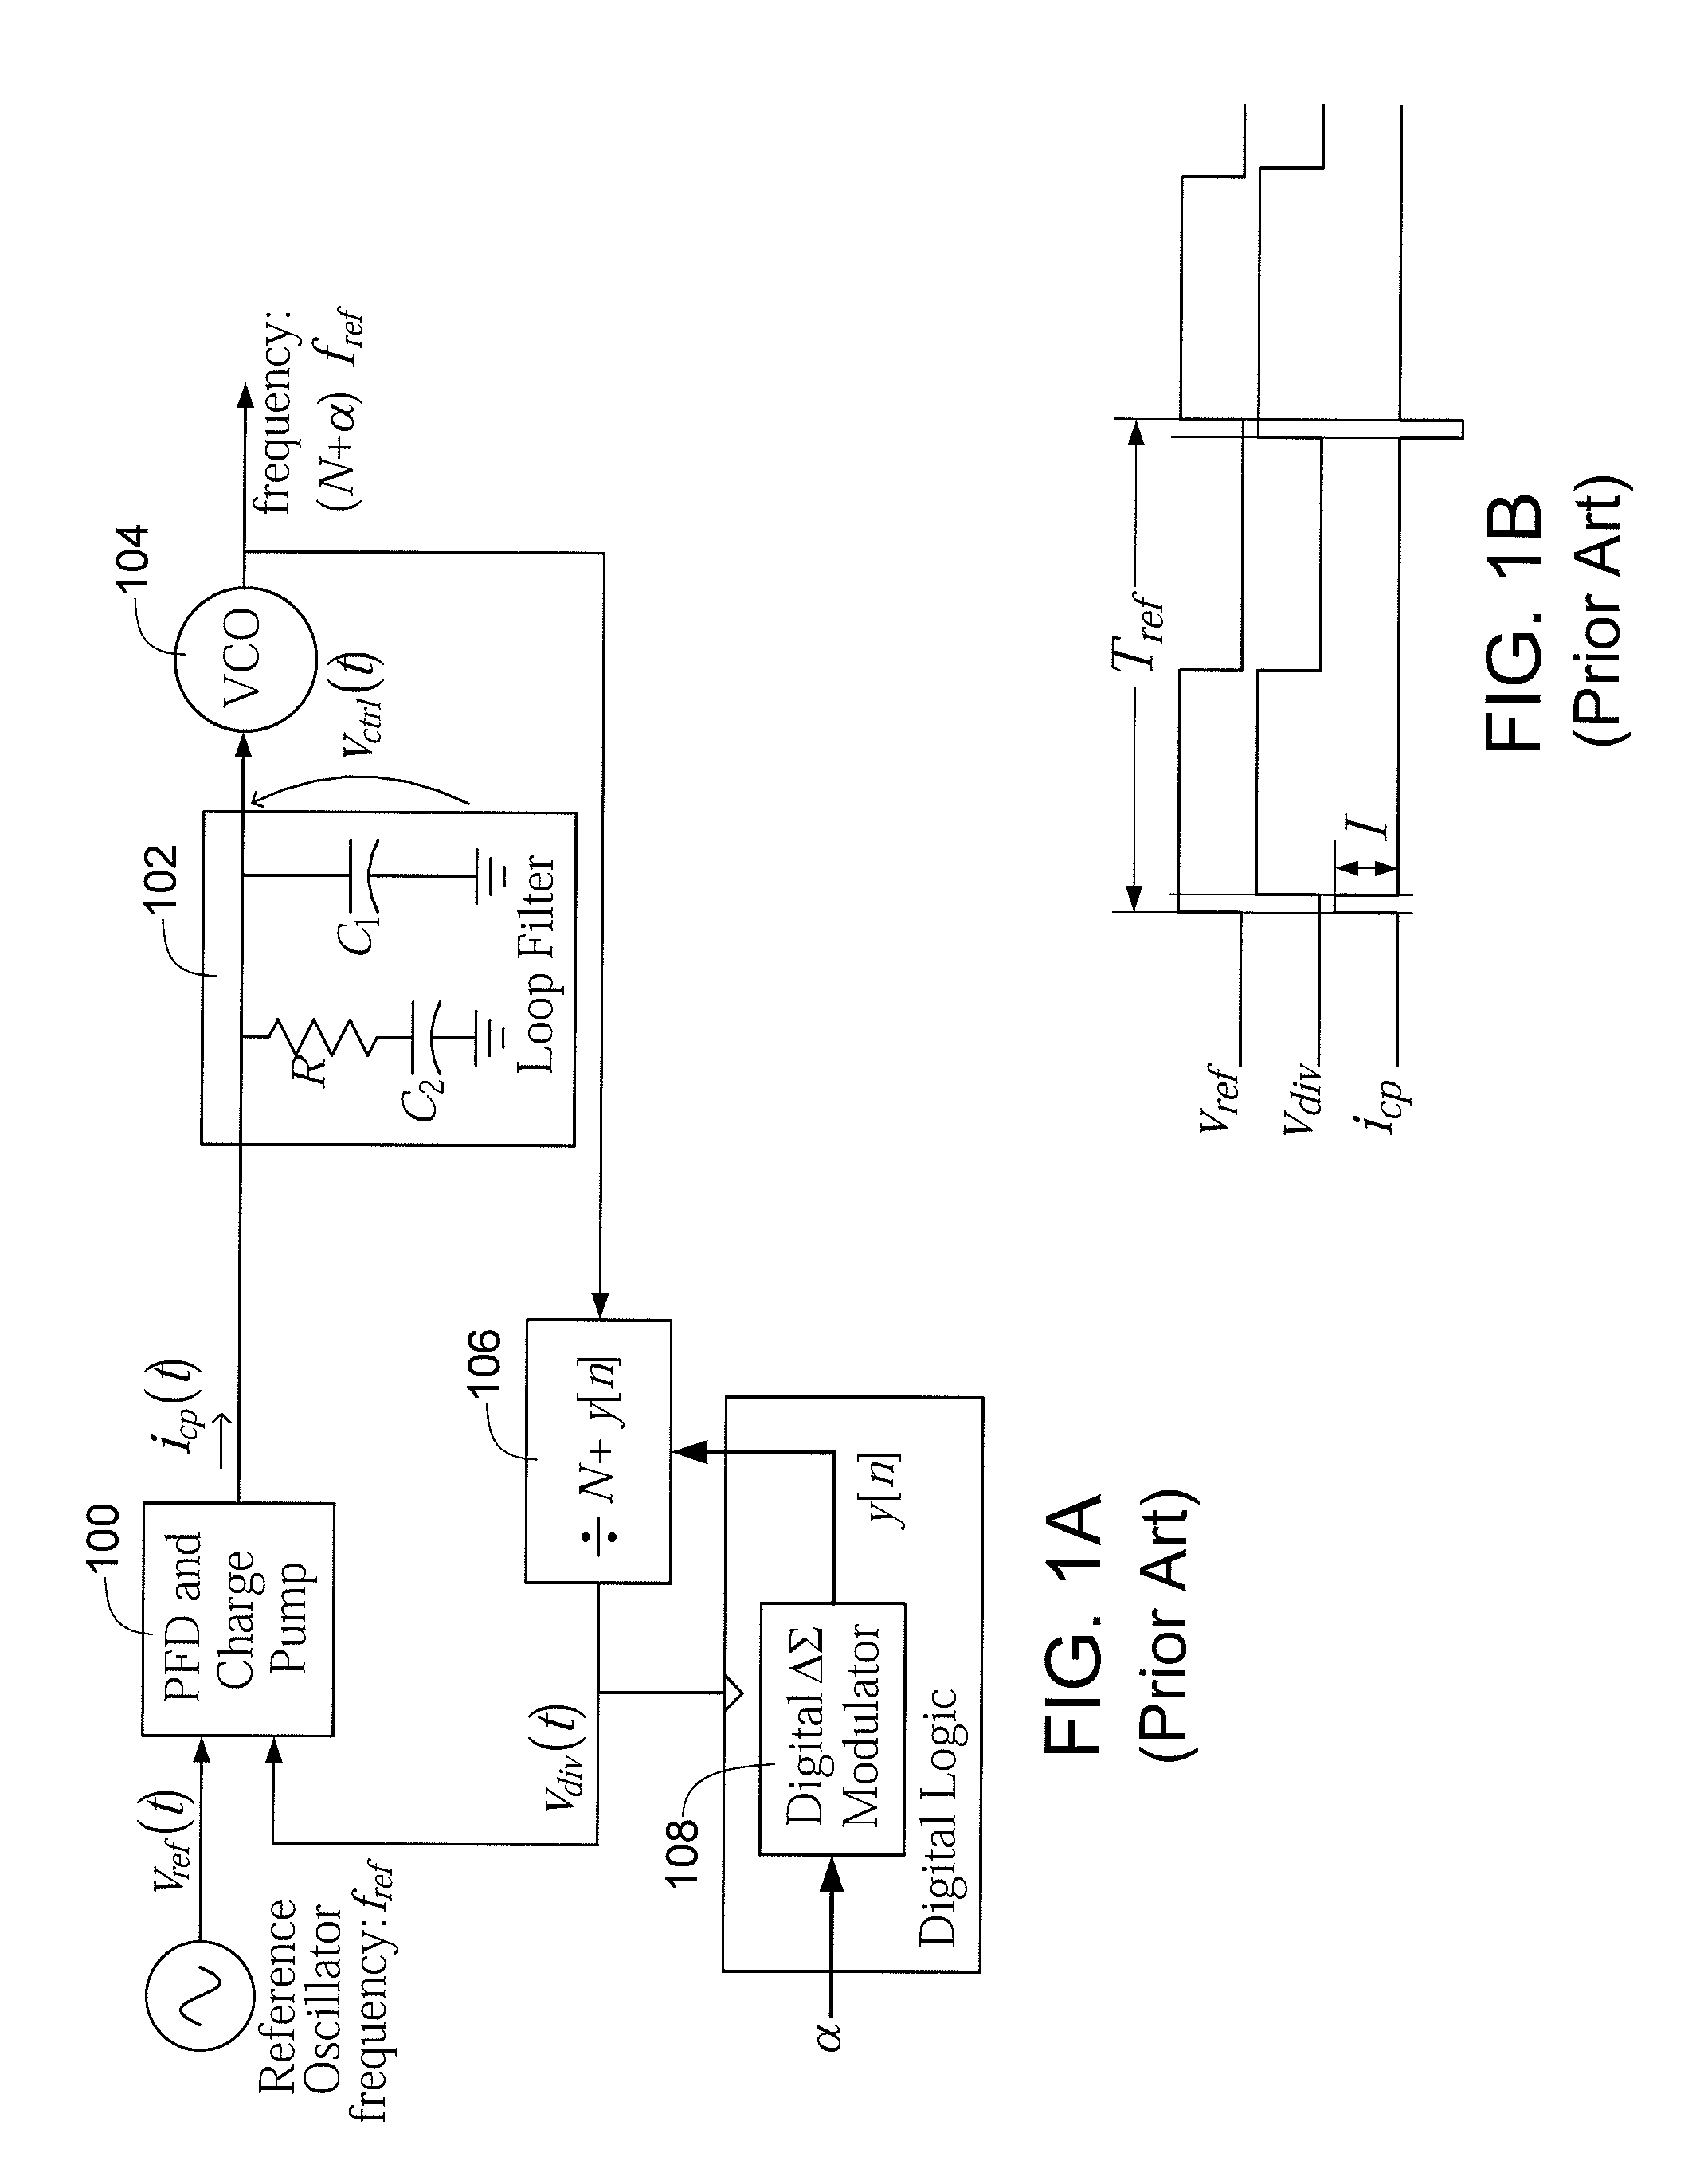 Adaptive phase noise cancellation for fractional-N phase locked loop